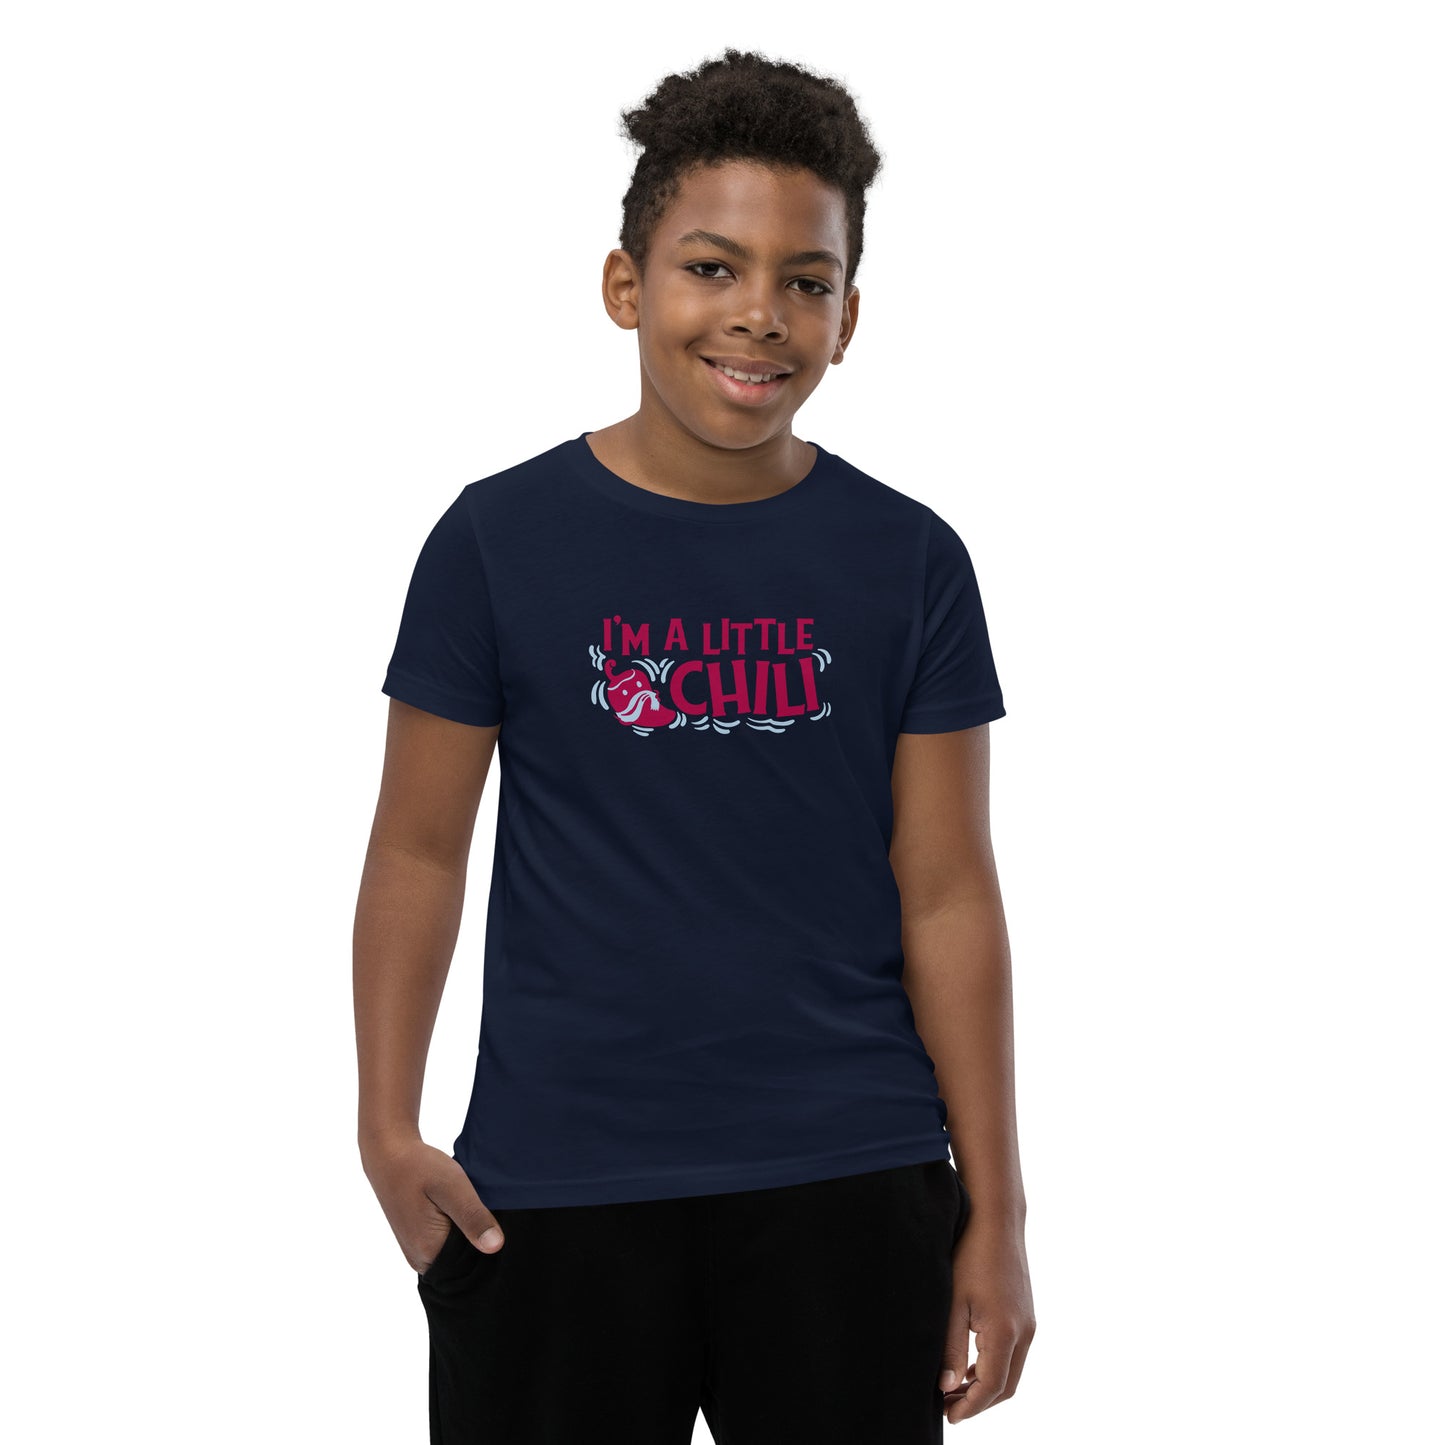 I'm A Little Chili Youth Short Sleeve T-Shirt